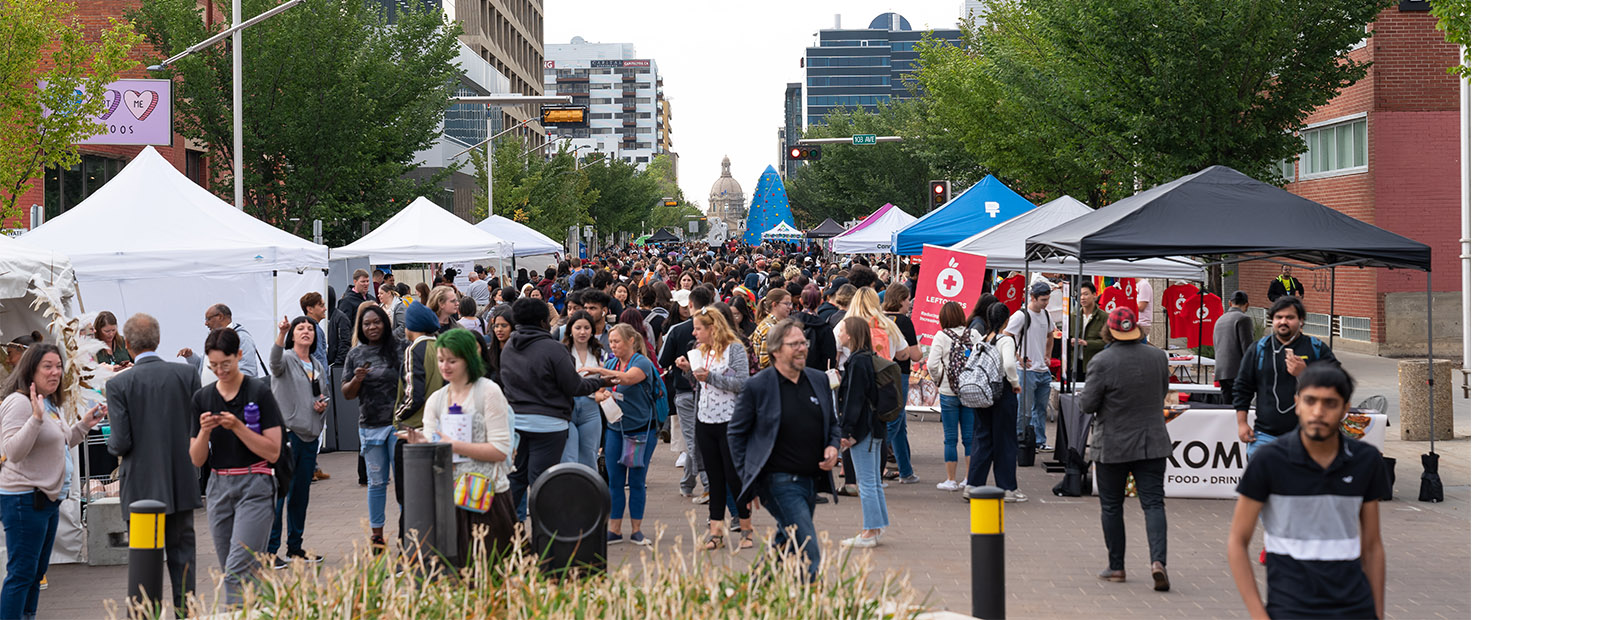 A crowd of people walking, eating and enjoying the festivities at the Downtown Campus Block Party